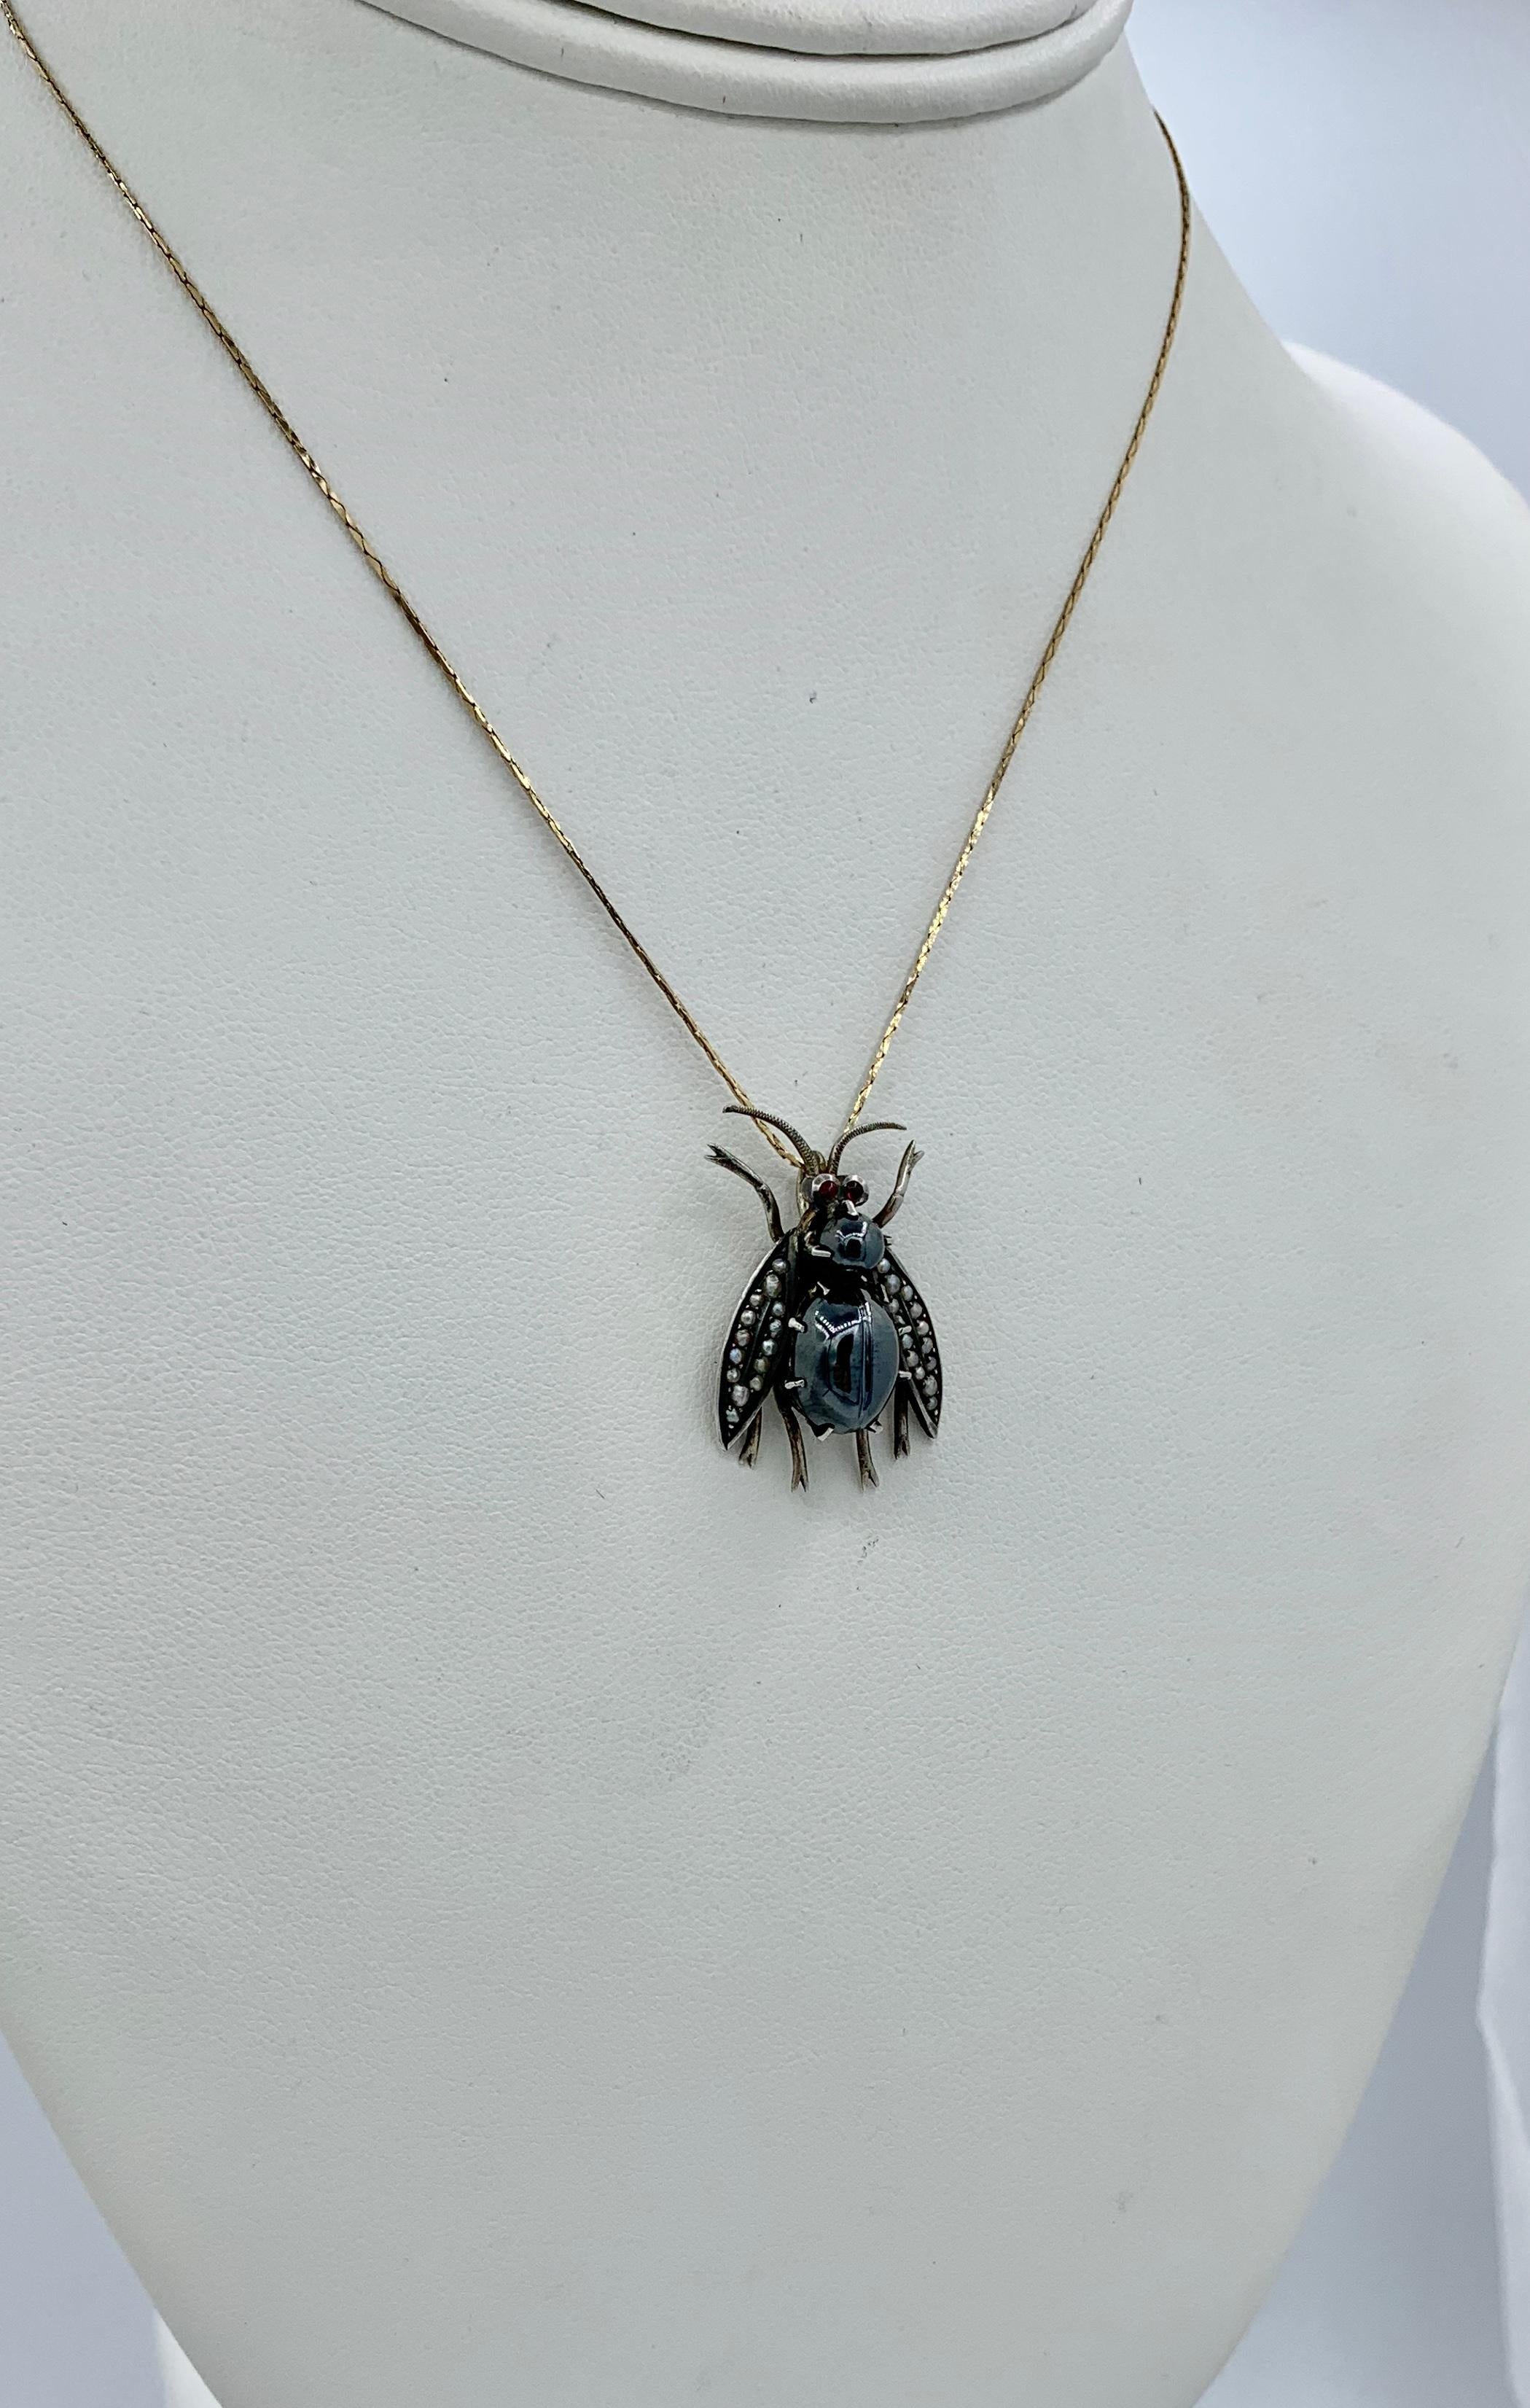 This is an absolutely wonderful and rare antique Victorian Fly, Beetle, Insect Pendant Necklace.  The stunning three dimensional insect is set with a round and an oval Hematite gem cabochon to form the body.  The larger hematite is carved with a